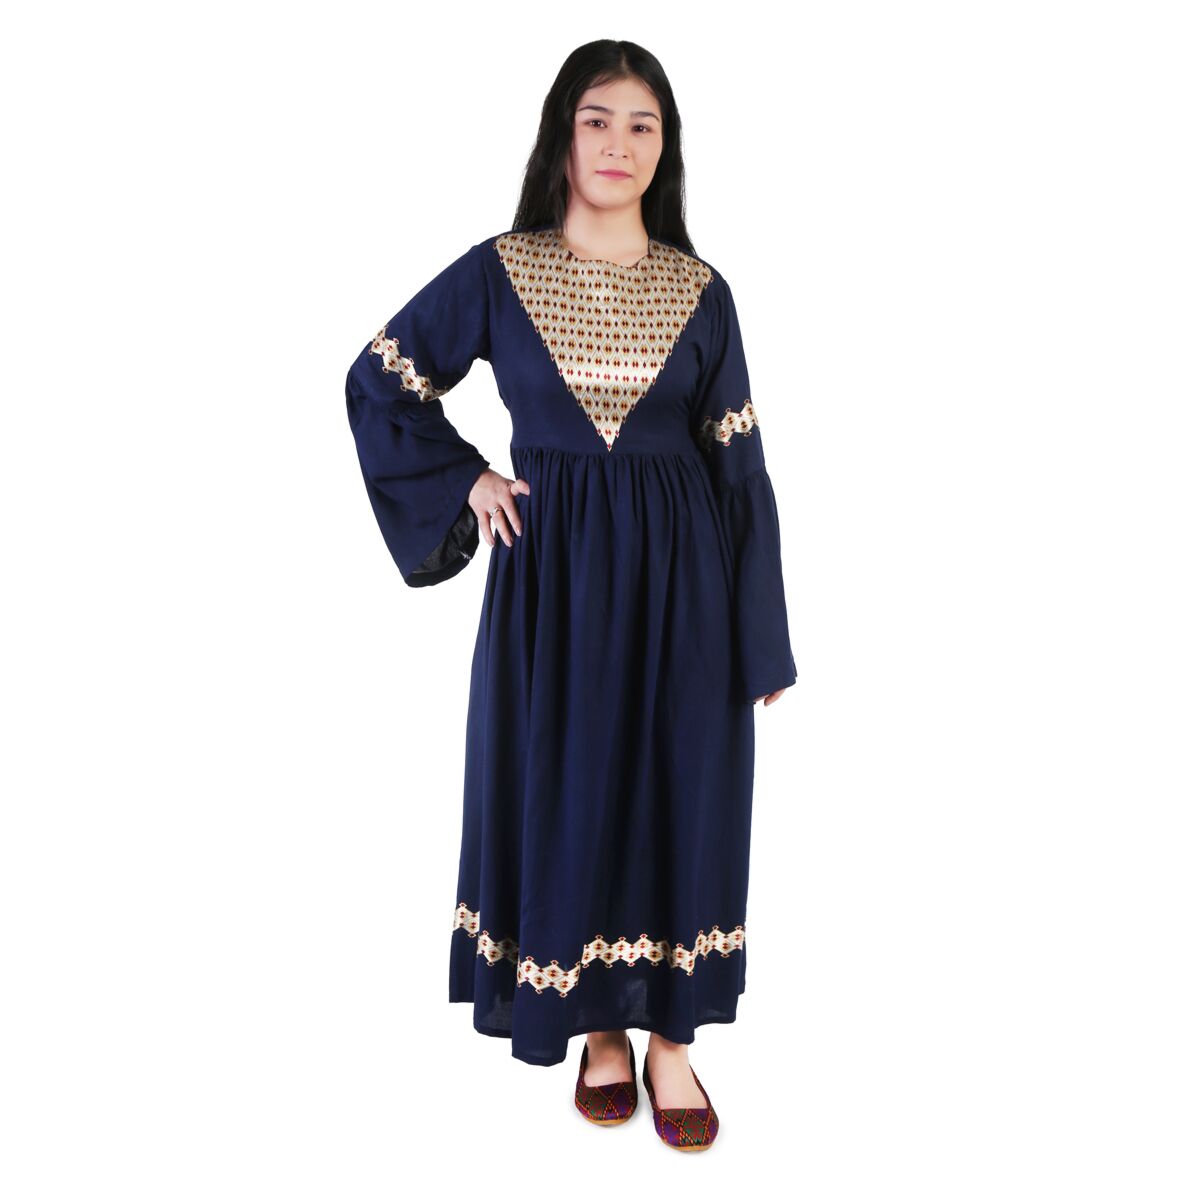 Golden Embroidered Pleated Frock | Navy Blue Bell Sleeve Dress 